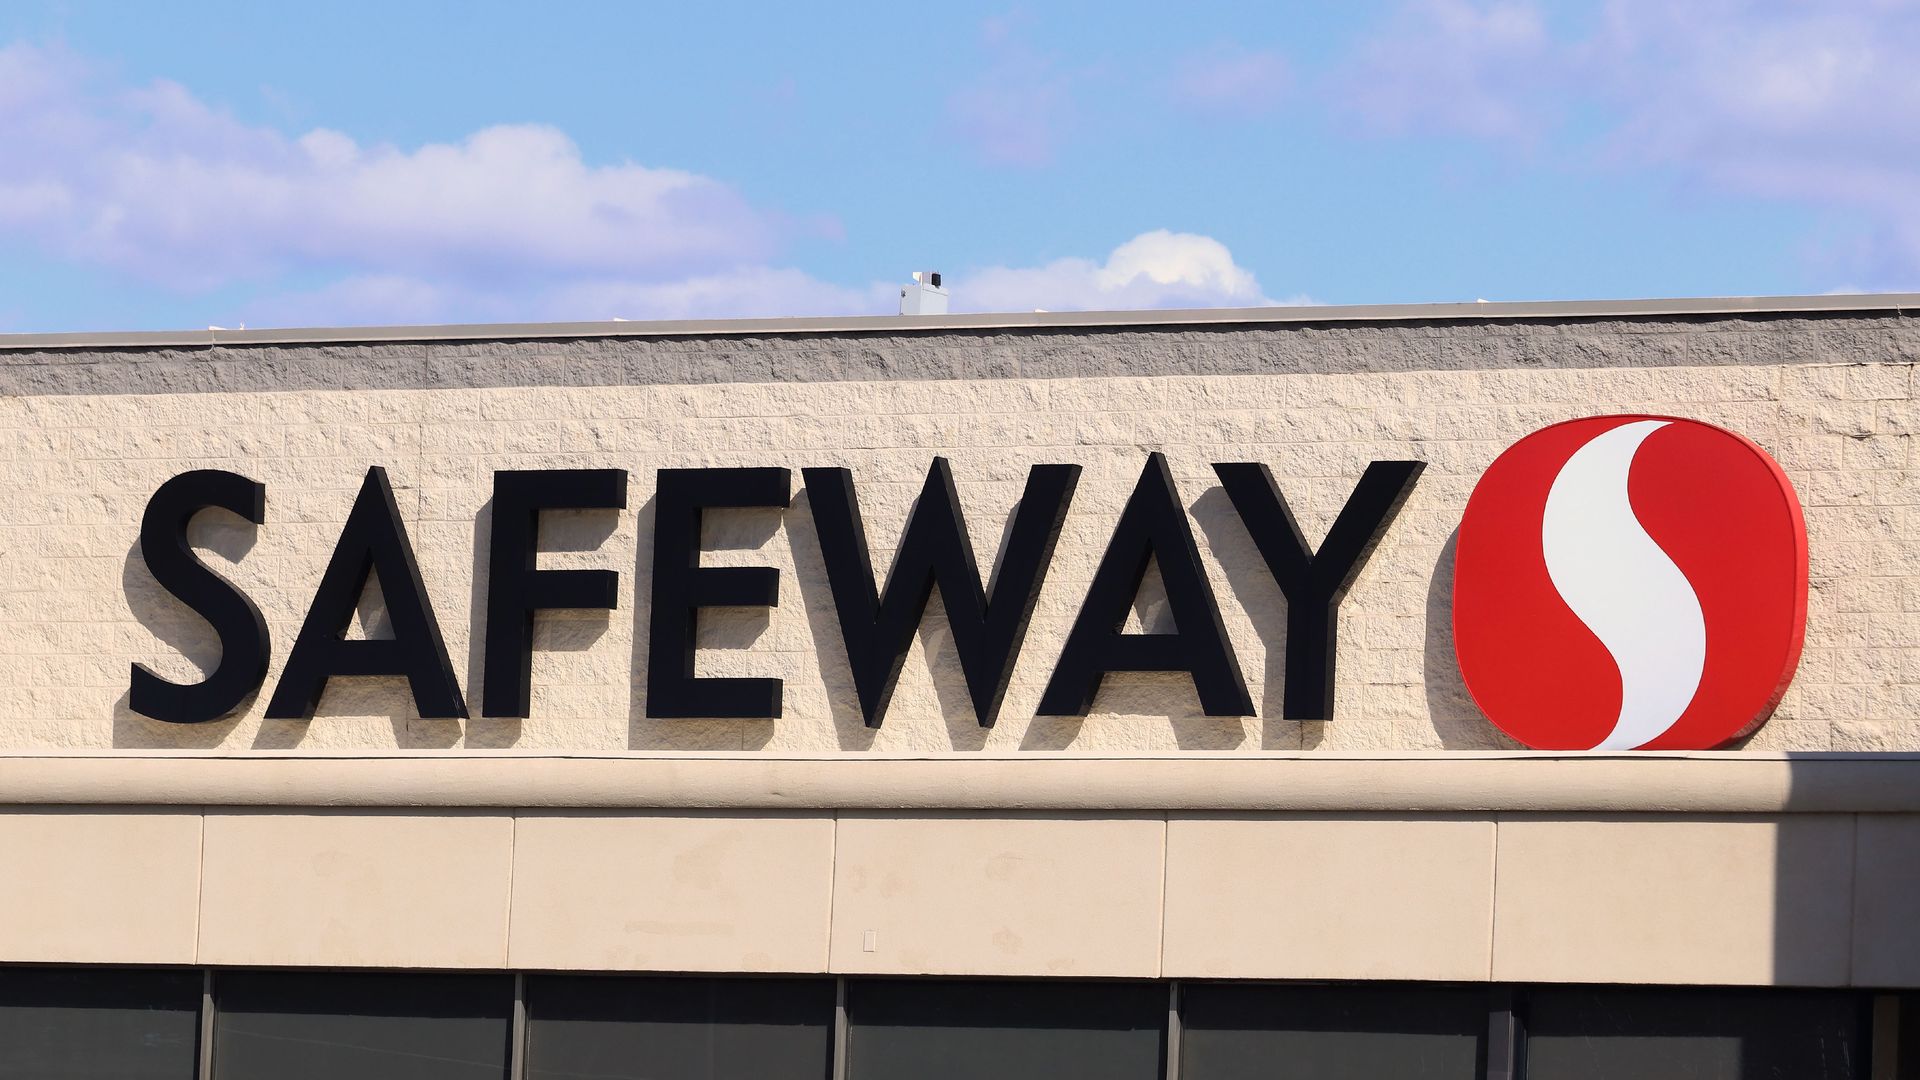 Safeway food store company logo above store entrance, northern Idaho. (Photo by: Don & Melinda Crawford/Education Images/Universal Images Group via Getty Images)